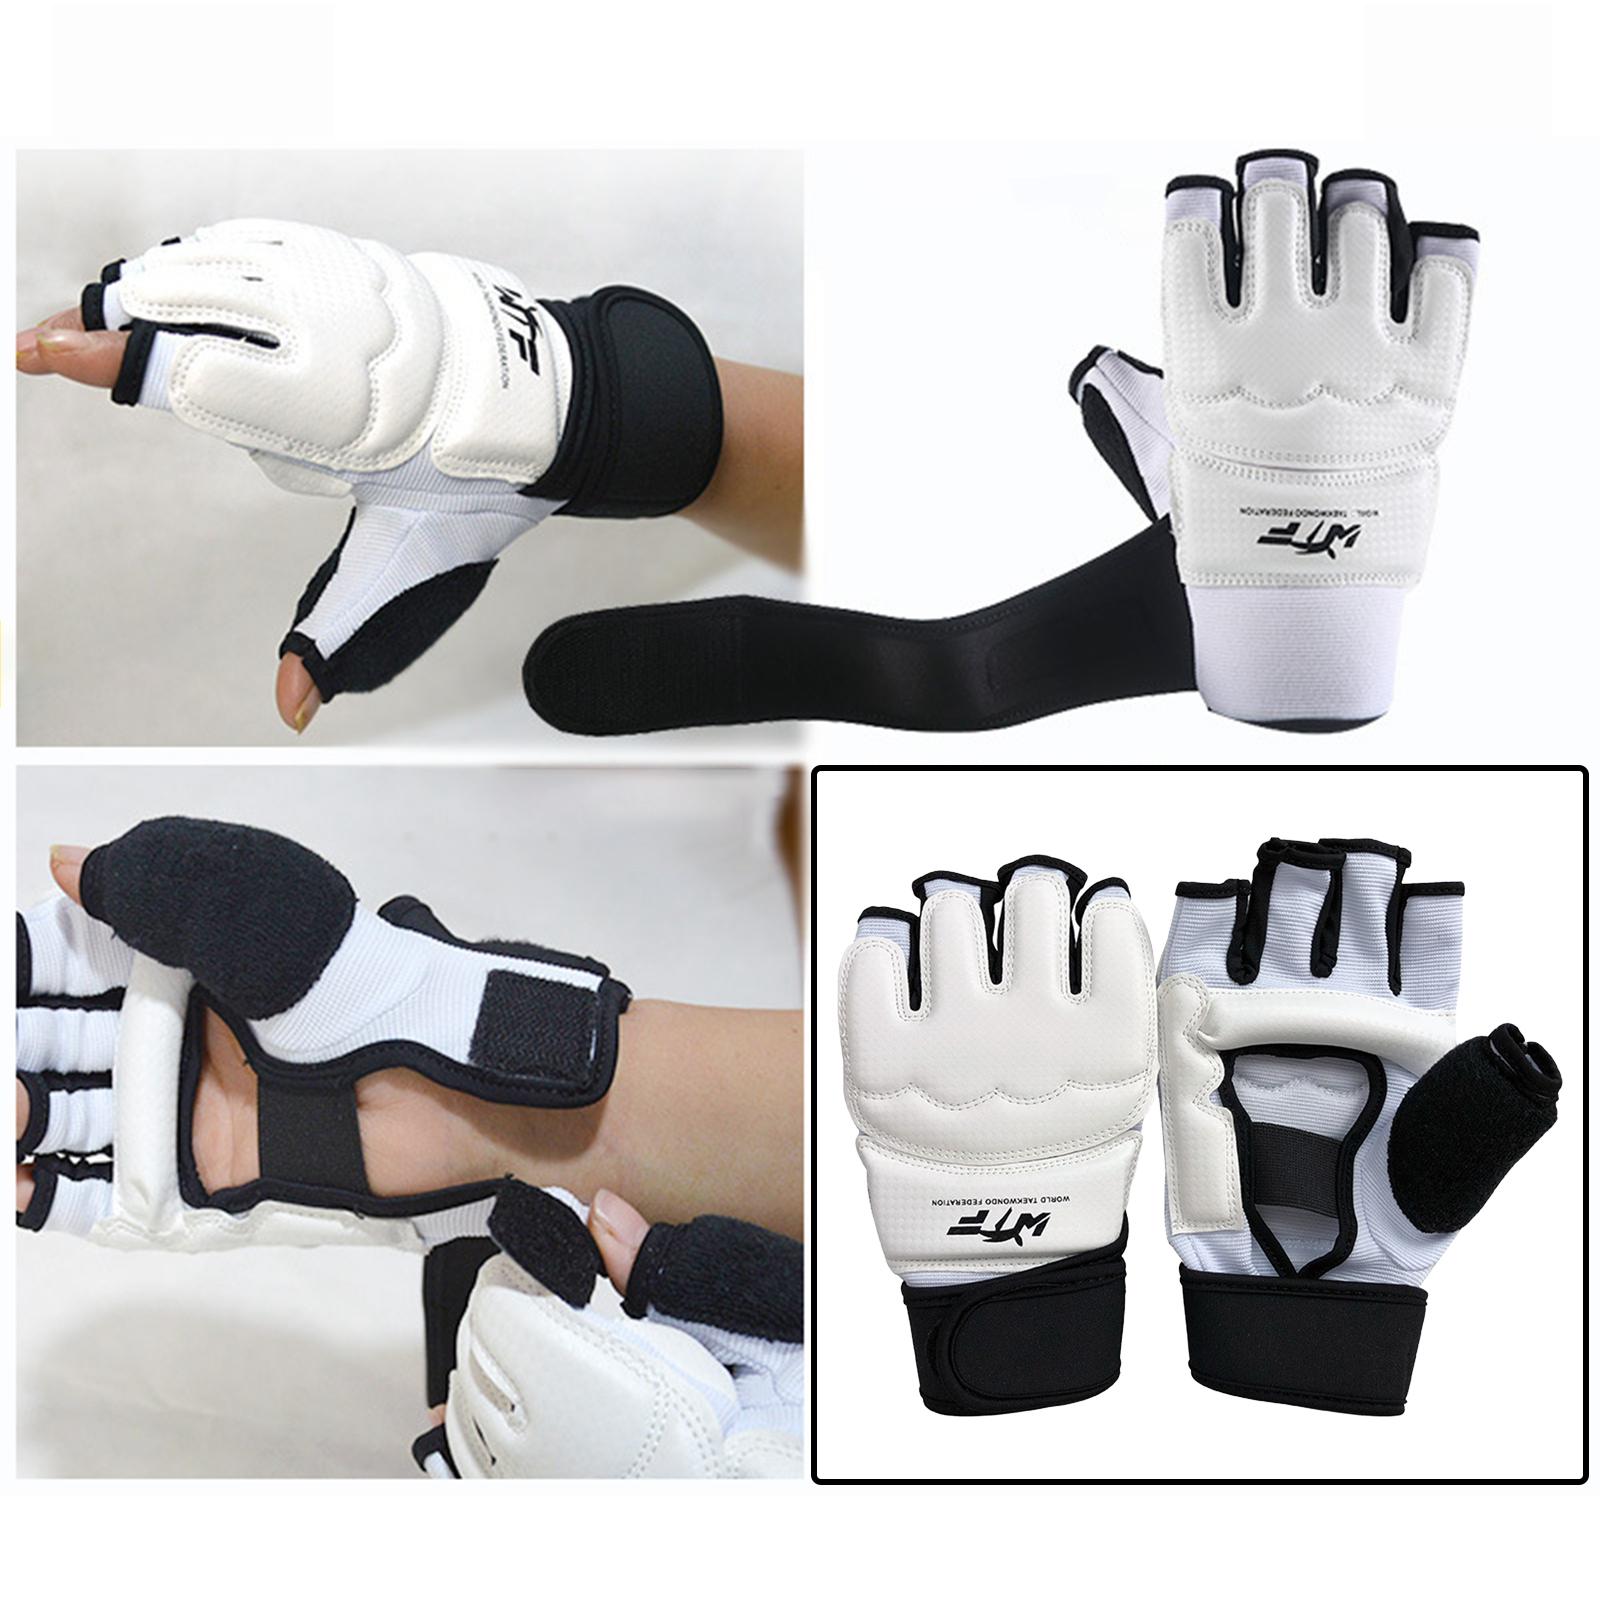 Gloves Foot Protector Guard Home Gym Boxing Taekwondo Karate Sparring Gear Hand XS